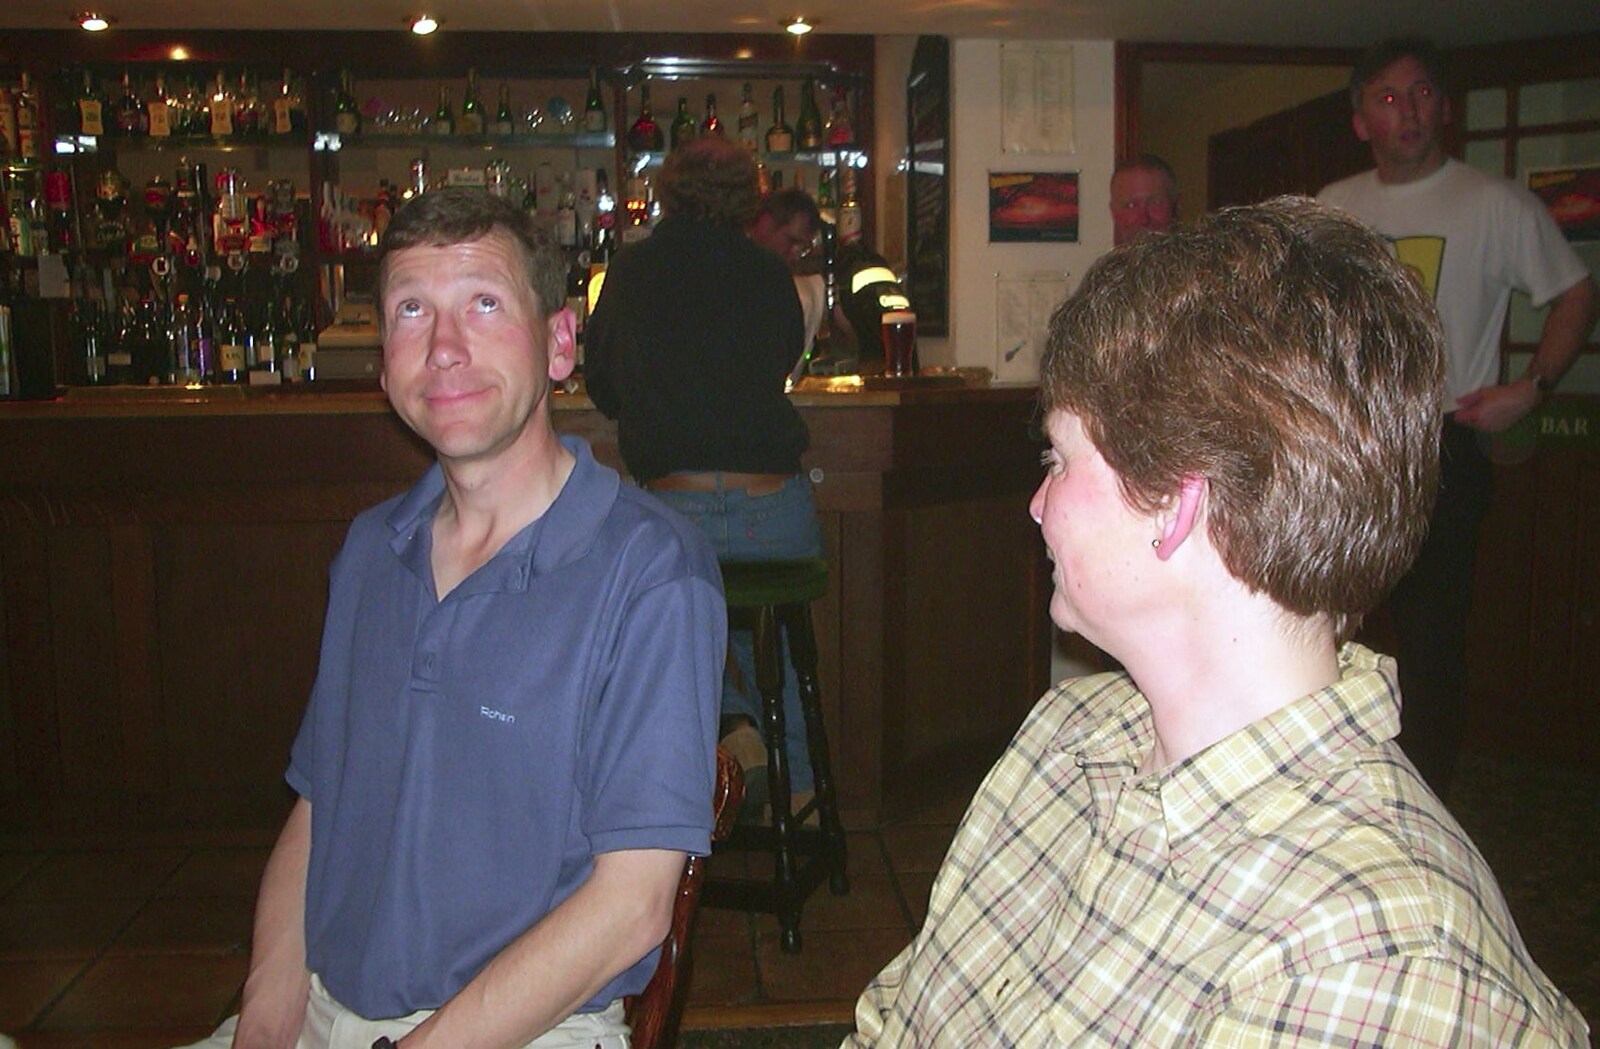 The BSCC Bike Ride, Shefford, Bedford - 11th May 2002: Apple John looks up at the ceiling